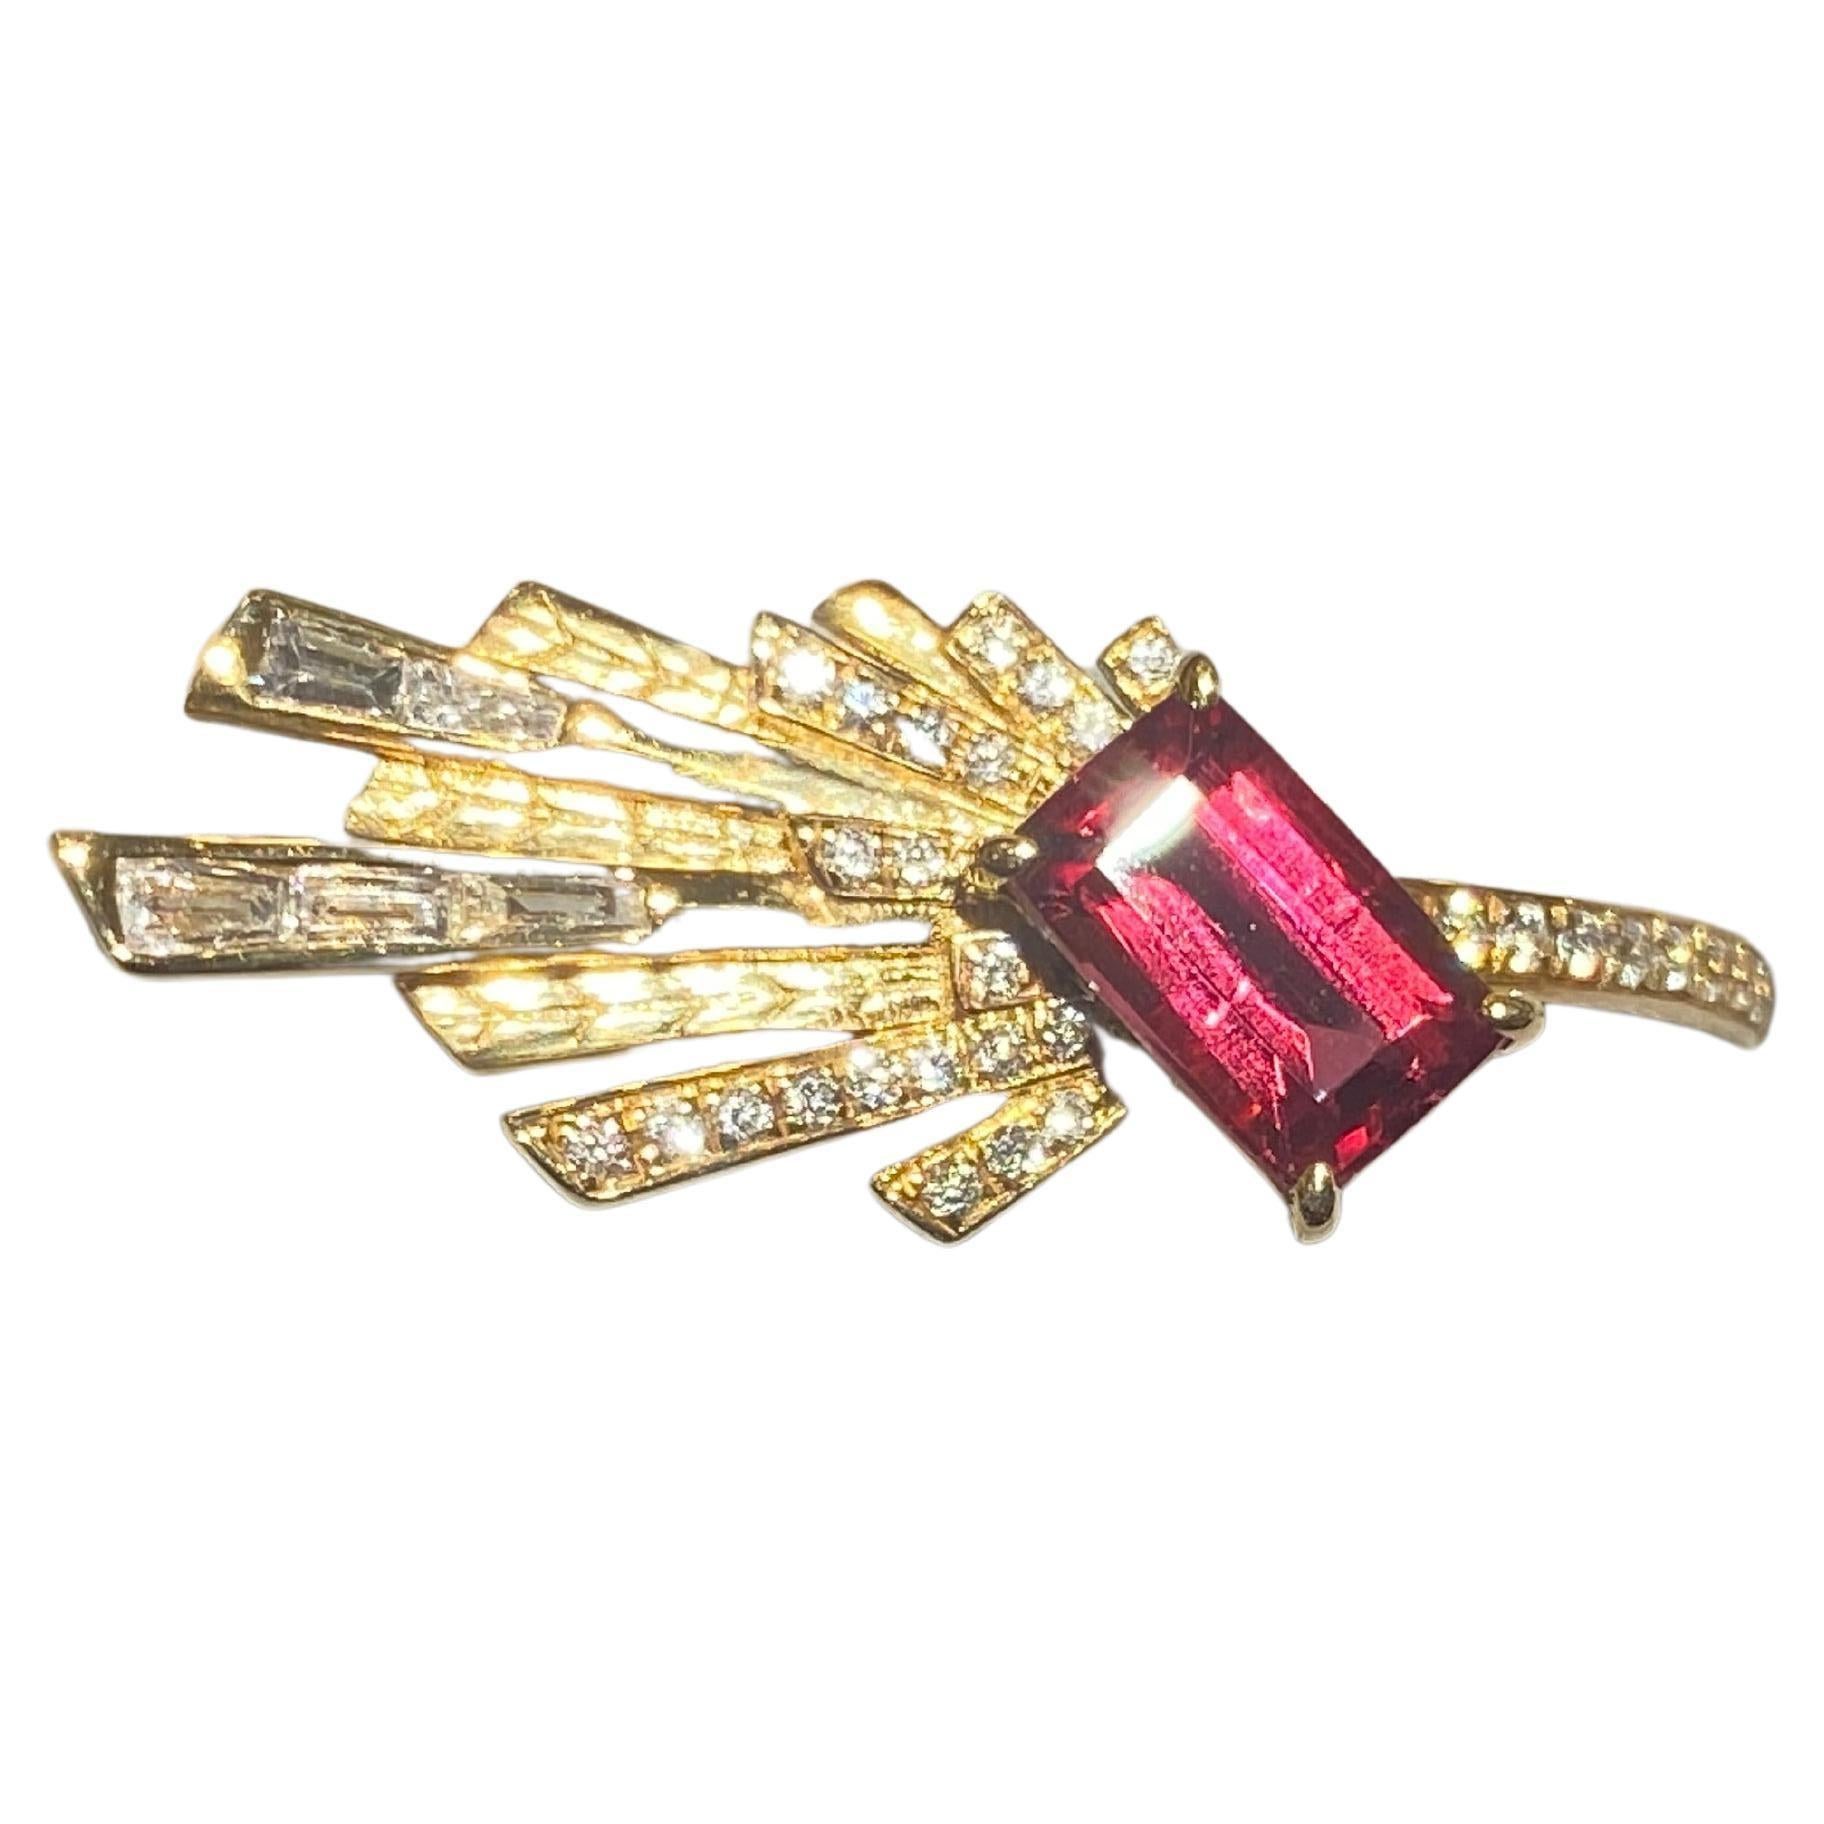 Eostre spinel and Diamond Ring in 18k Yellow Gold